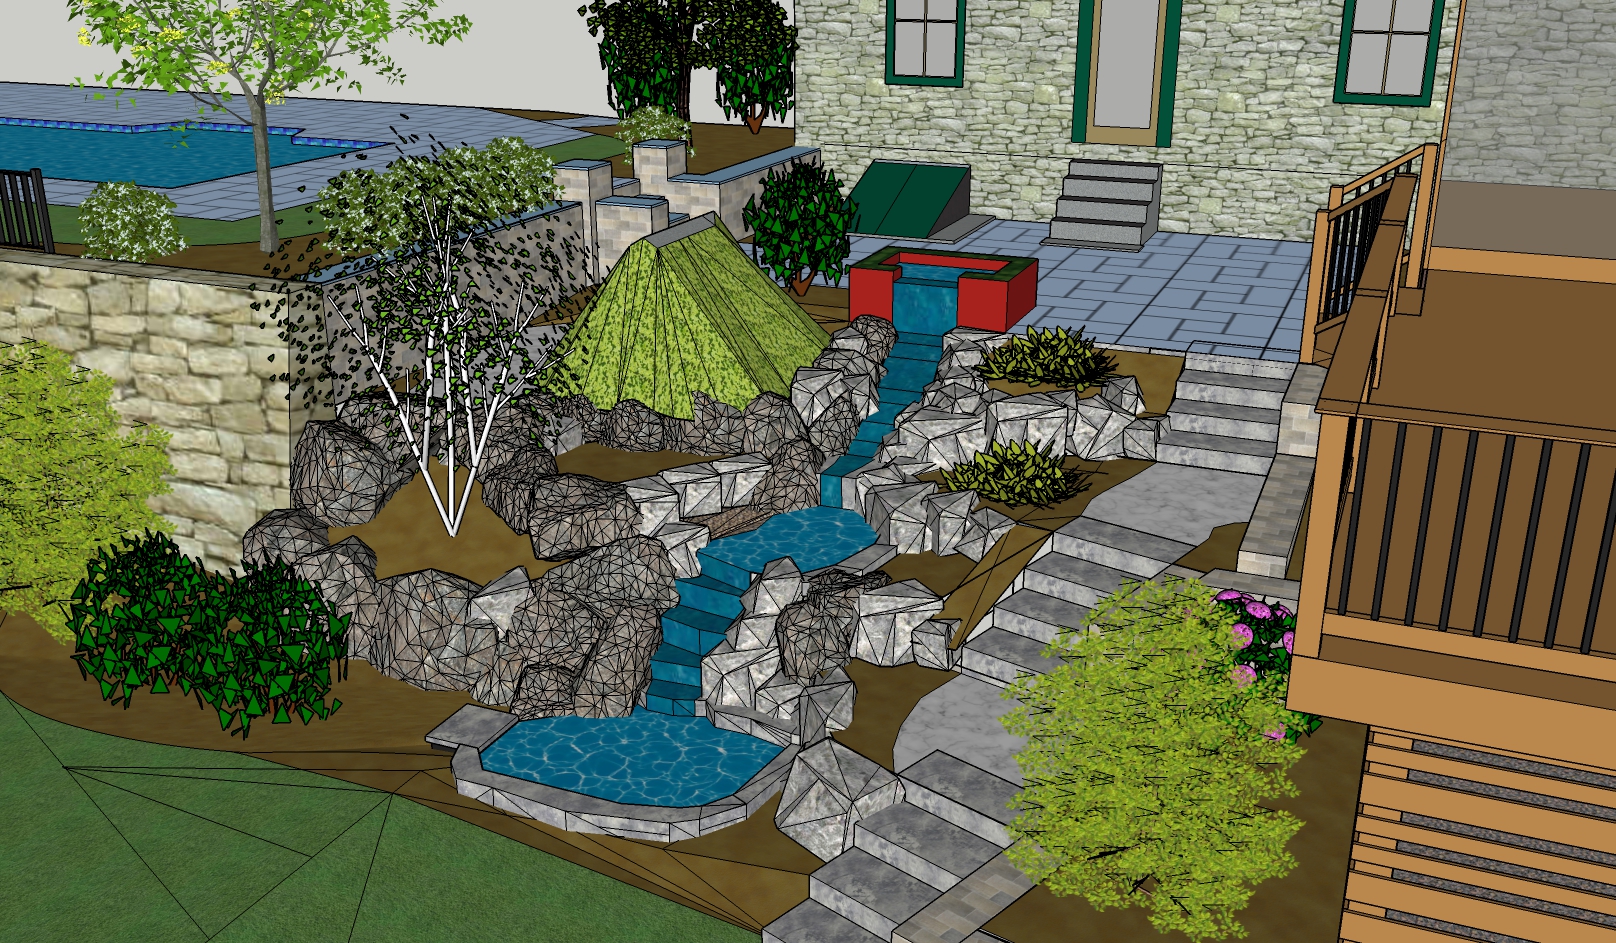 3D sketchup capture of patio area with focus on cascading water feature, steps and more